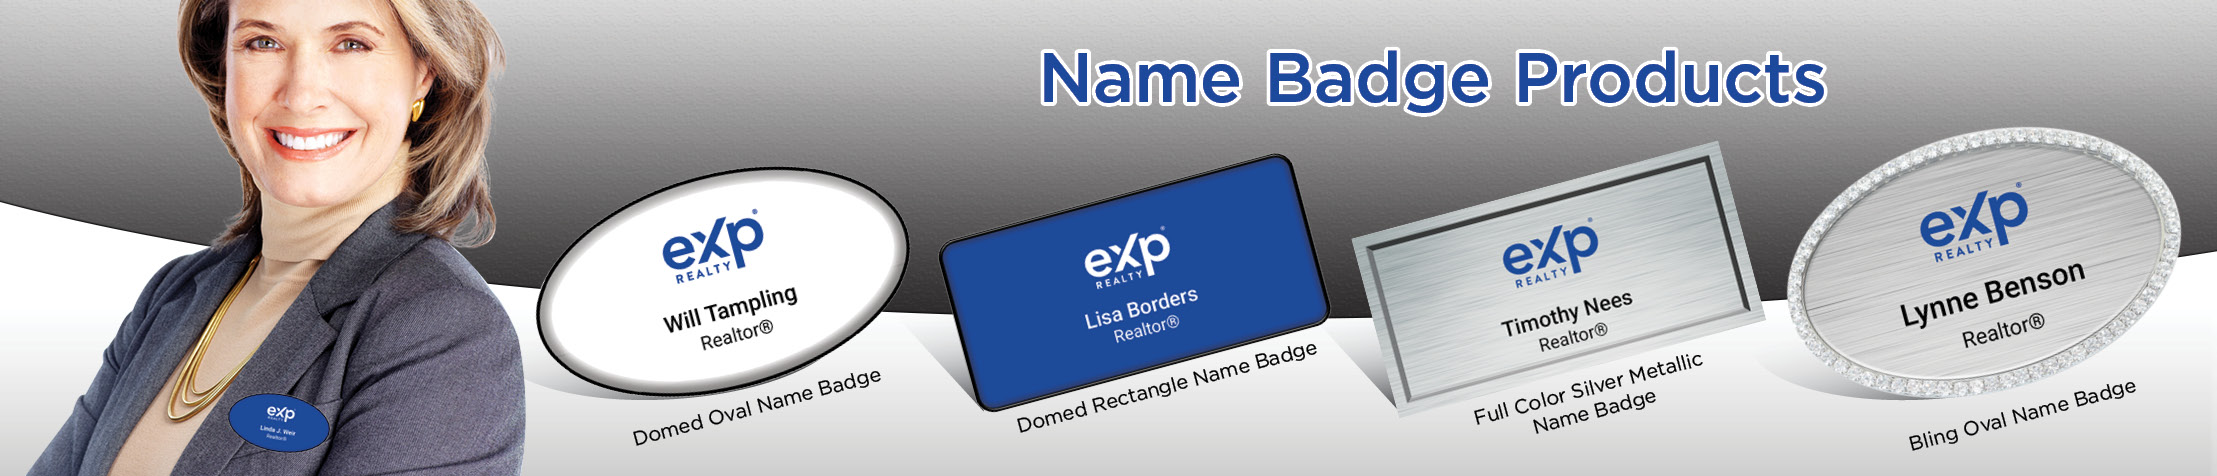 eXp Realty Real Estate Name Badge Products - eXp Realty Name Tags for Realtors | BestPrintBuy.com